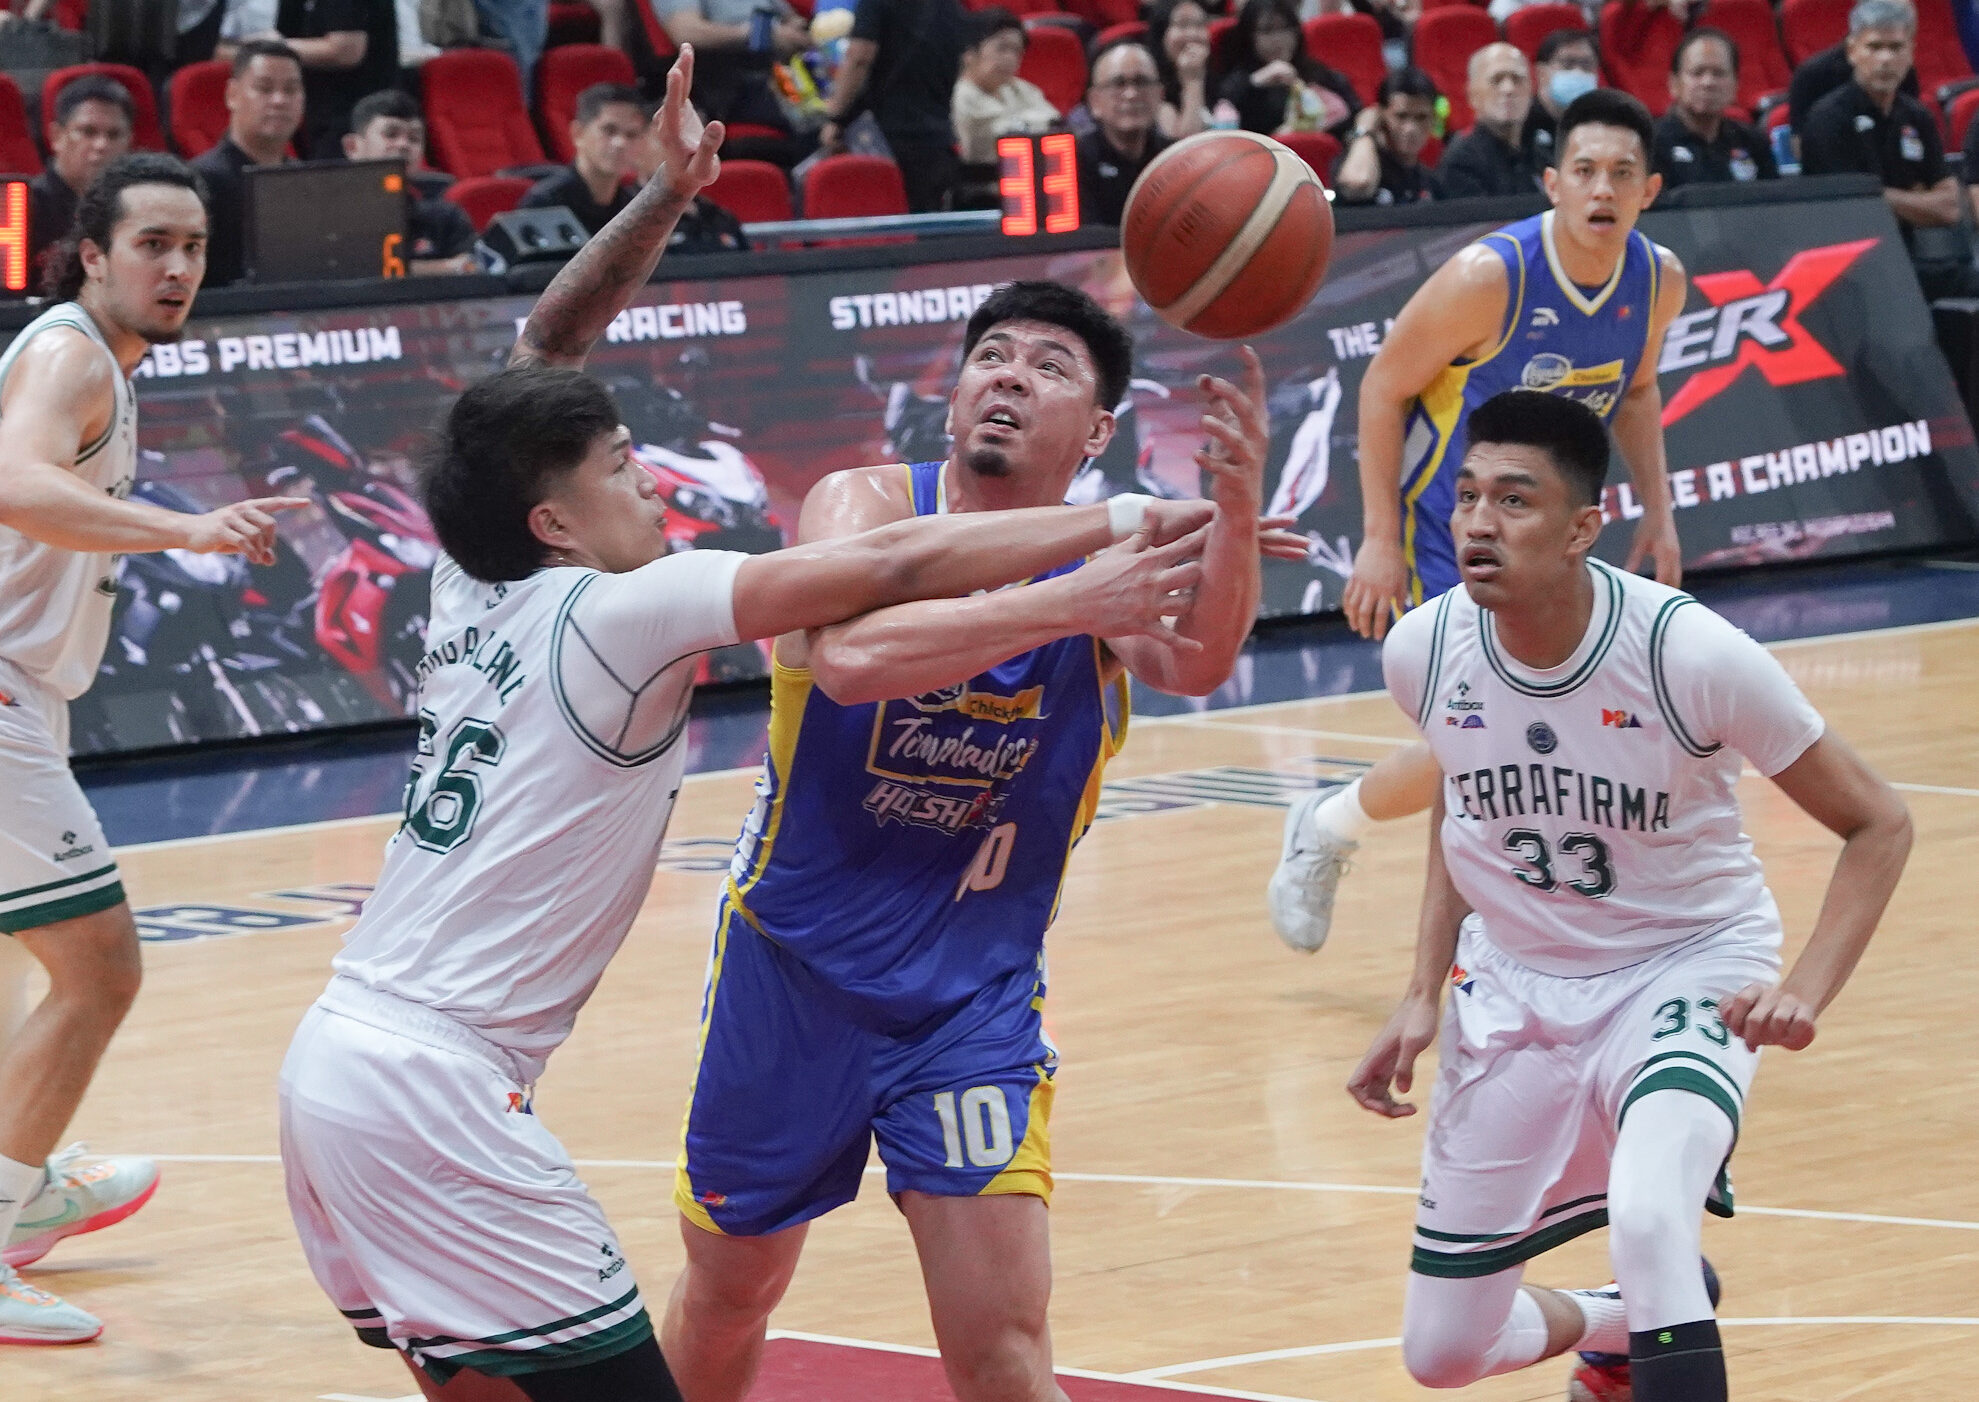 Ian Sangalang (right) gets a hard foul from Louie Sangalang.